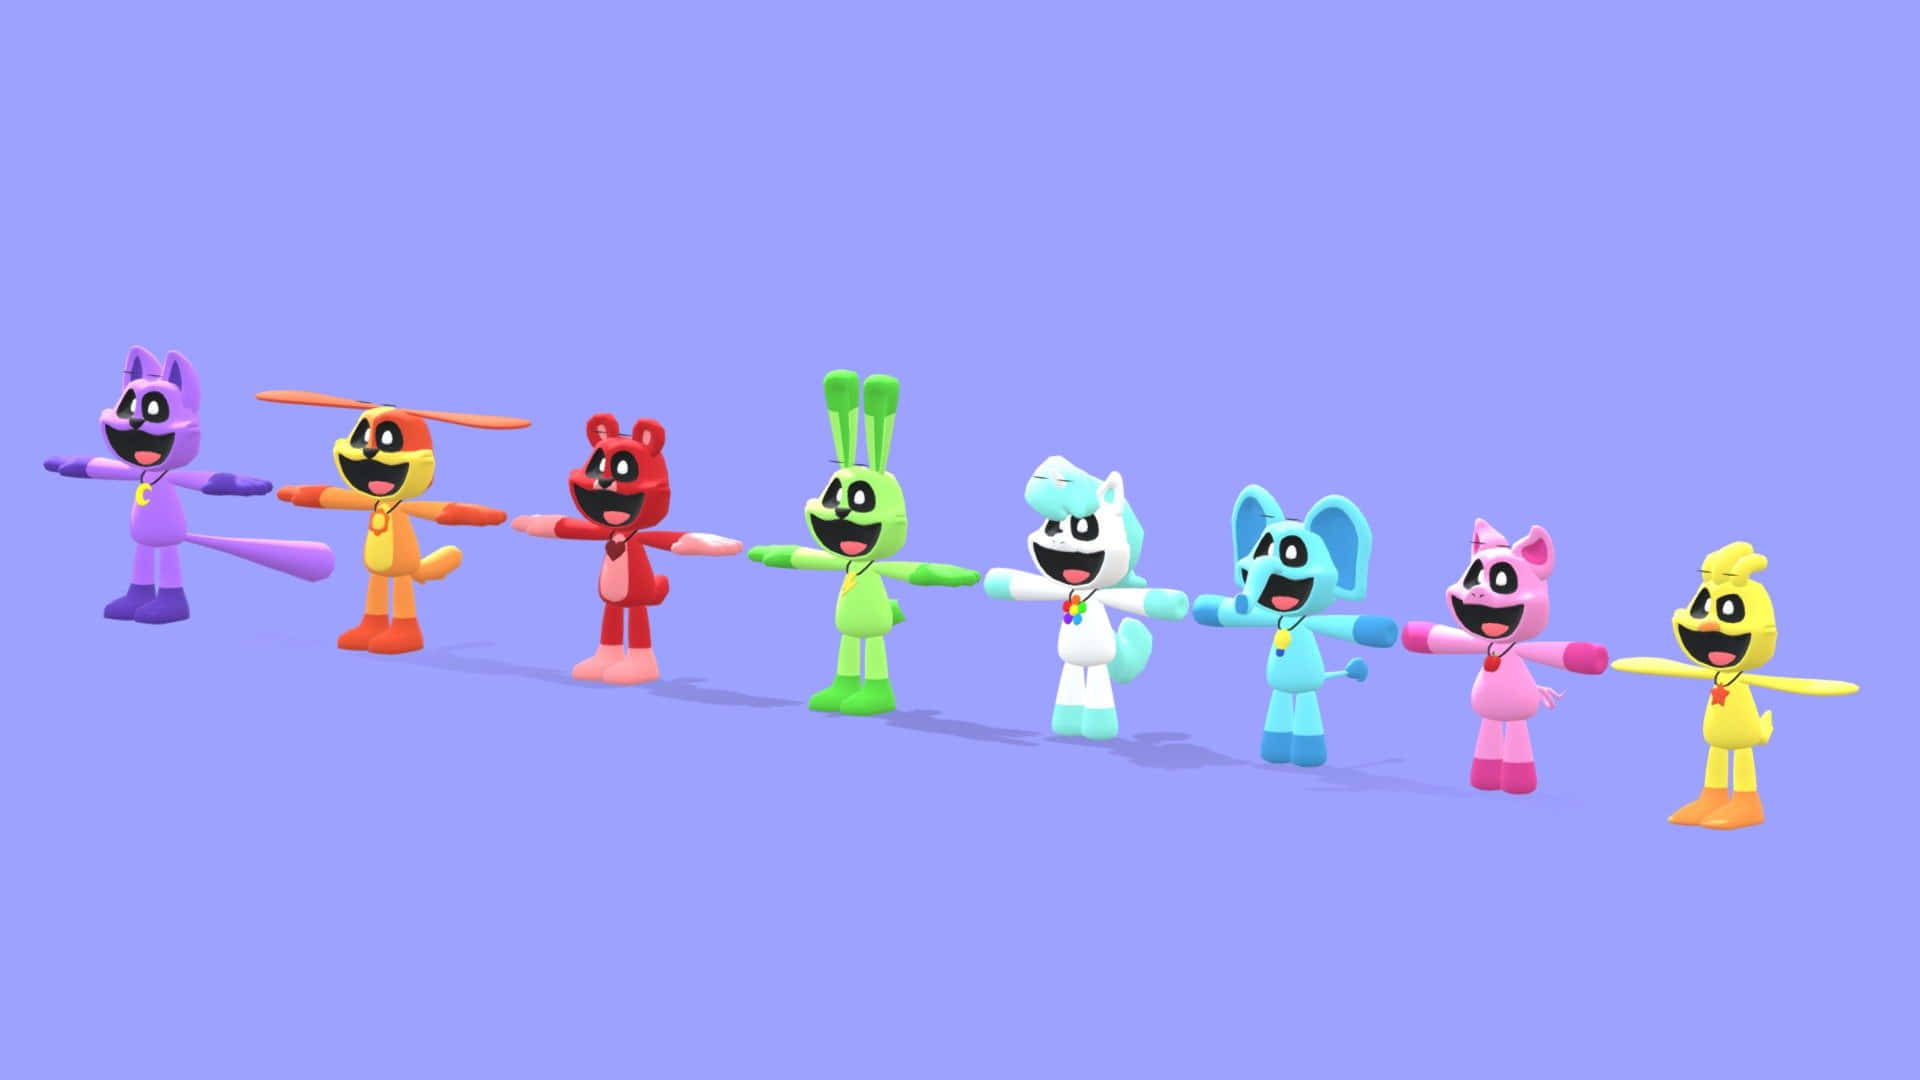 Colorful_ Animated_ Critters_ Holding_ Hands Wallpaper